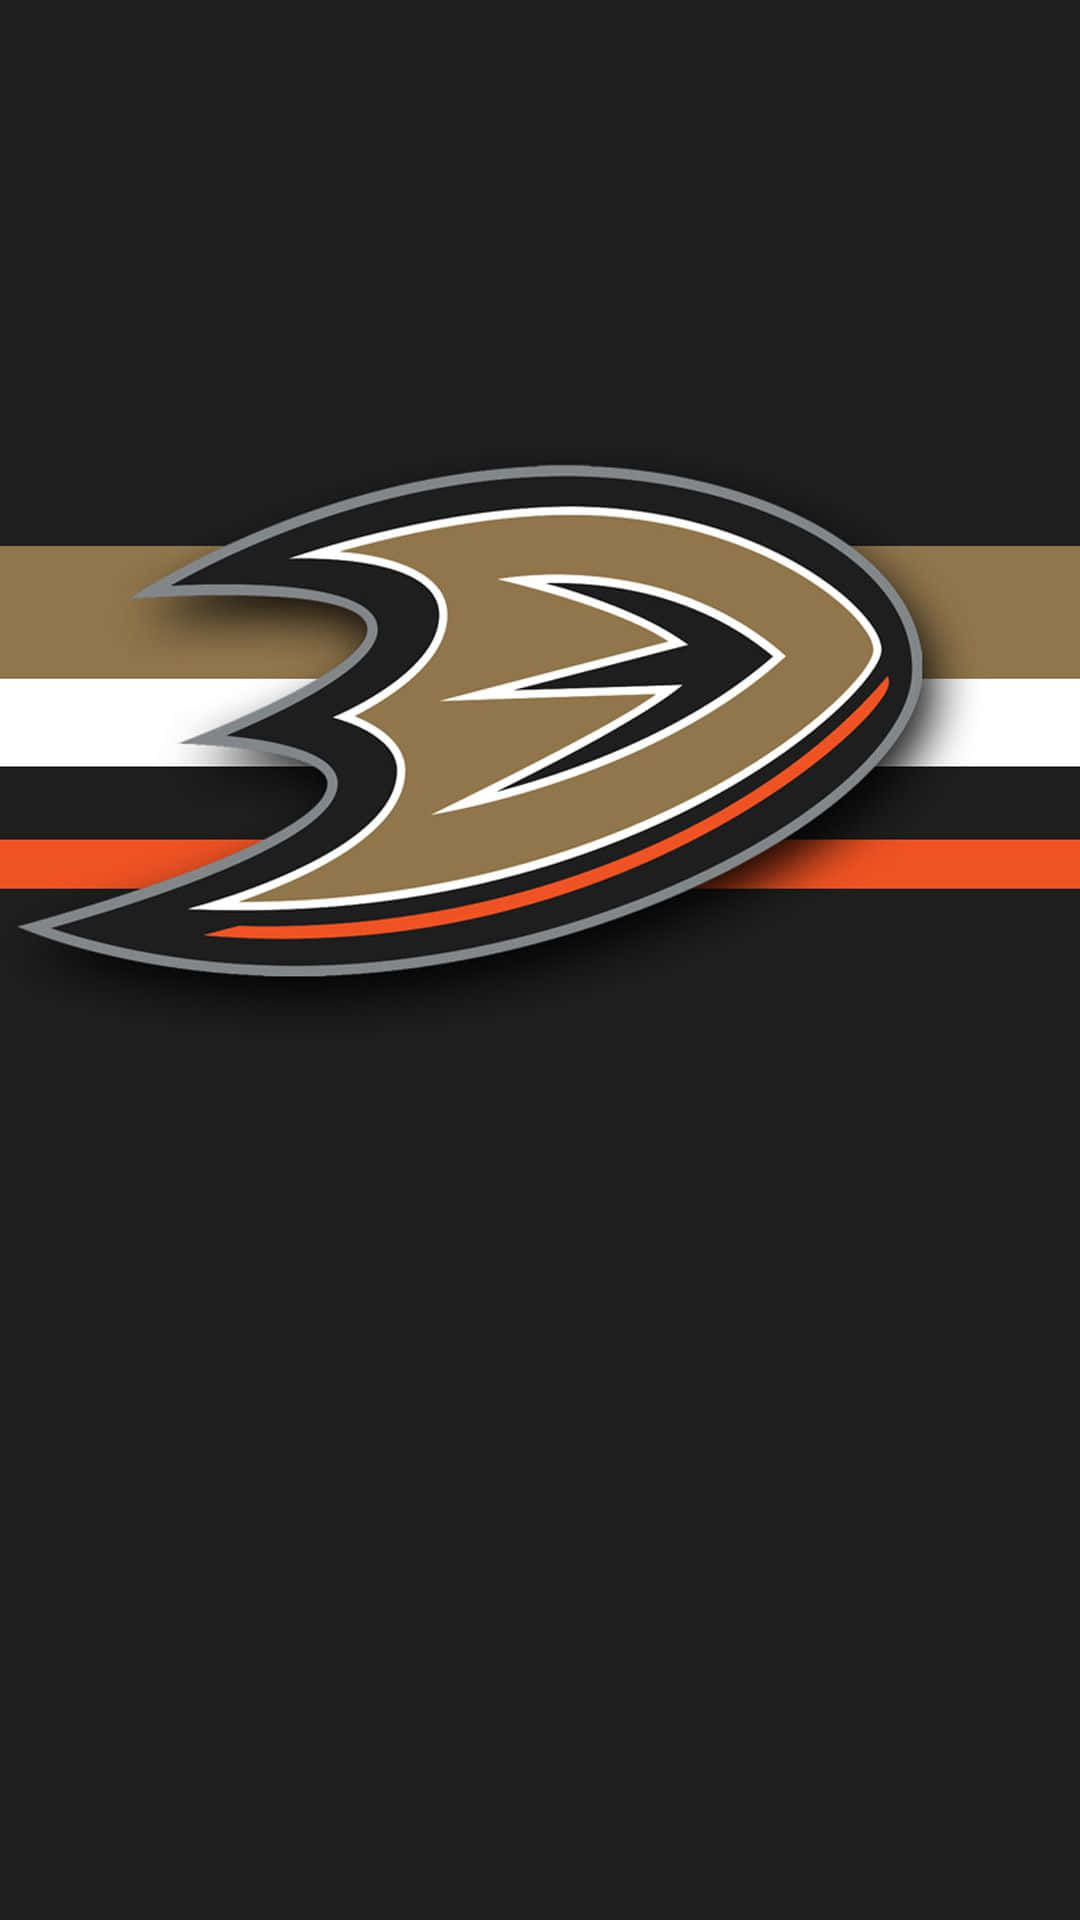 Scoring for Victory - Anaheim Ducks on the Rise